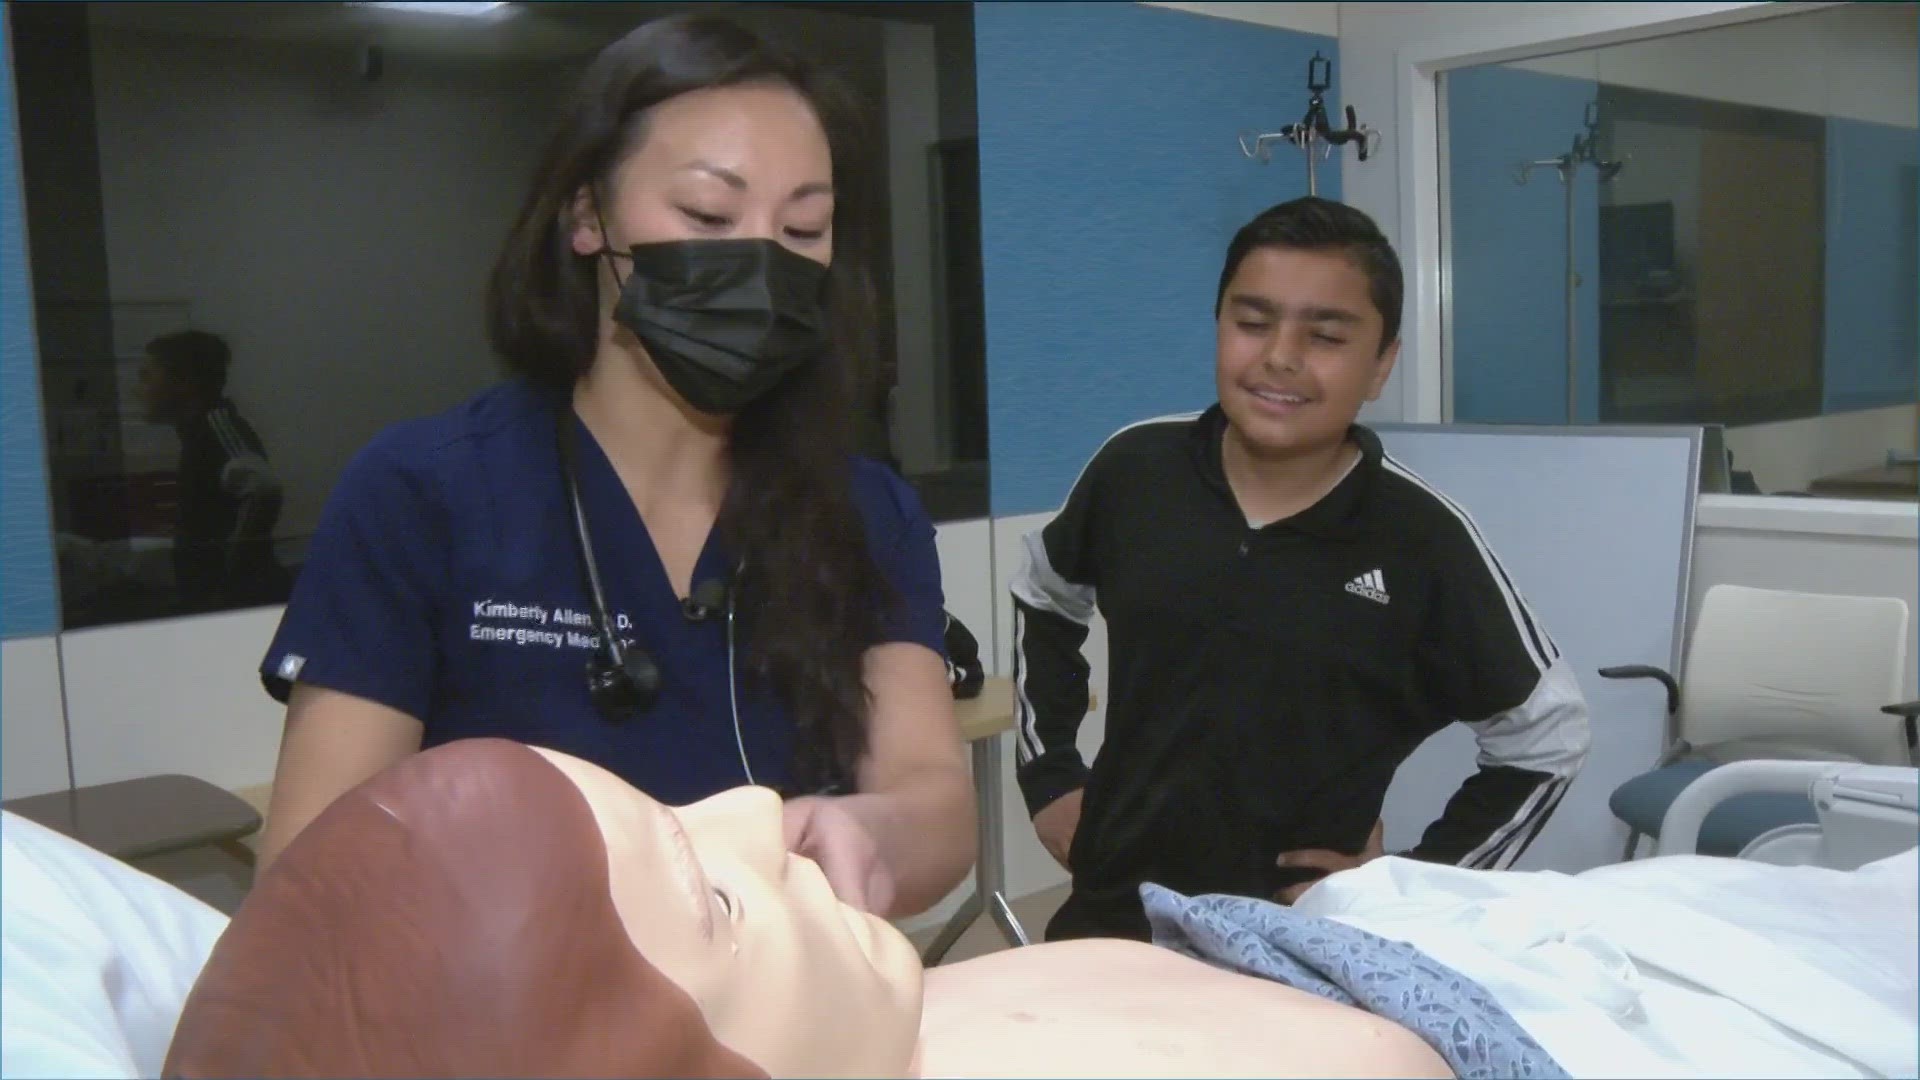 Kaiser Permanente welcomed students from Chula Vista Middle School where they got unique chance at hands-on medical training.